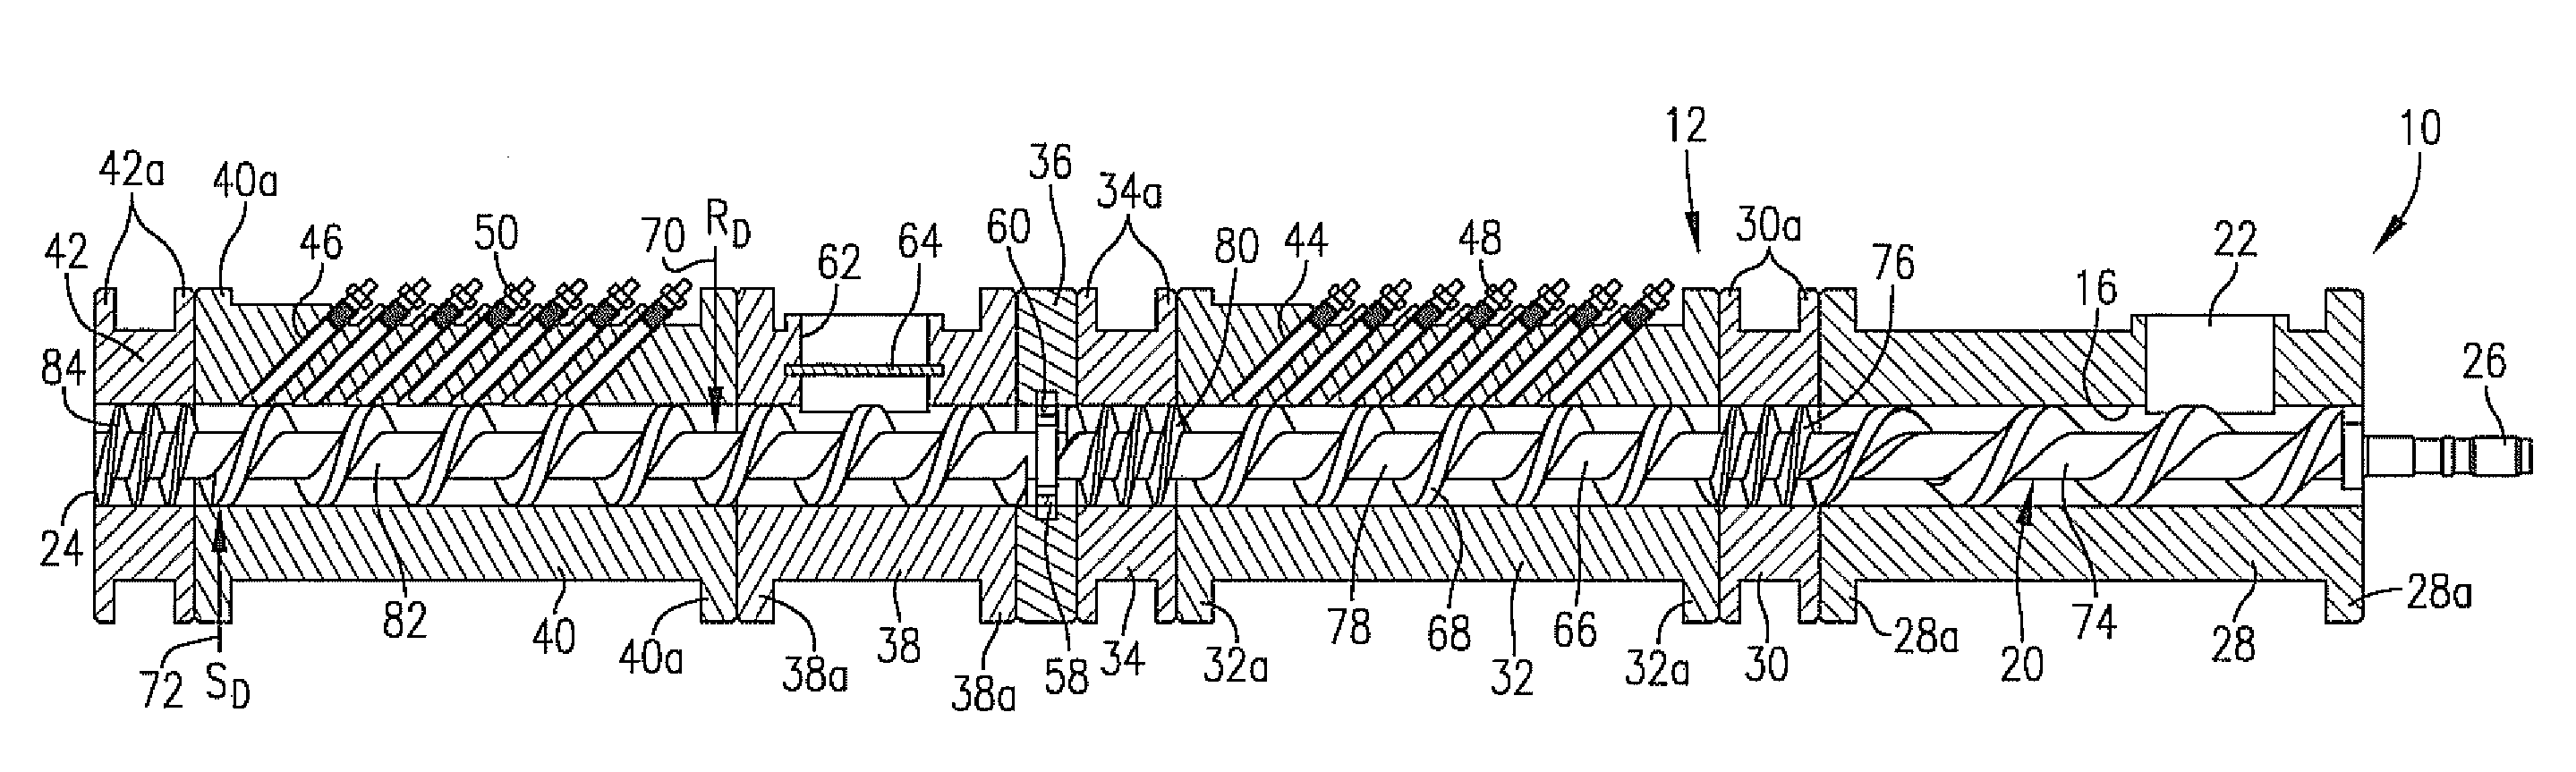 Cooking extruder with enhanced steam injection properties